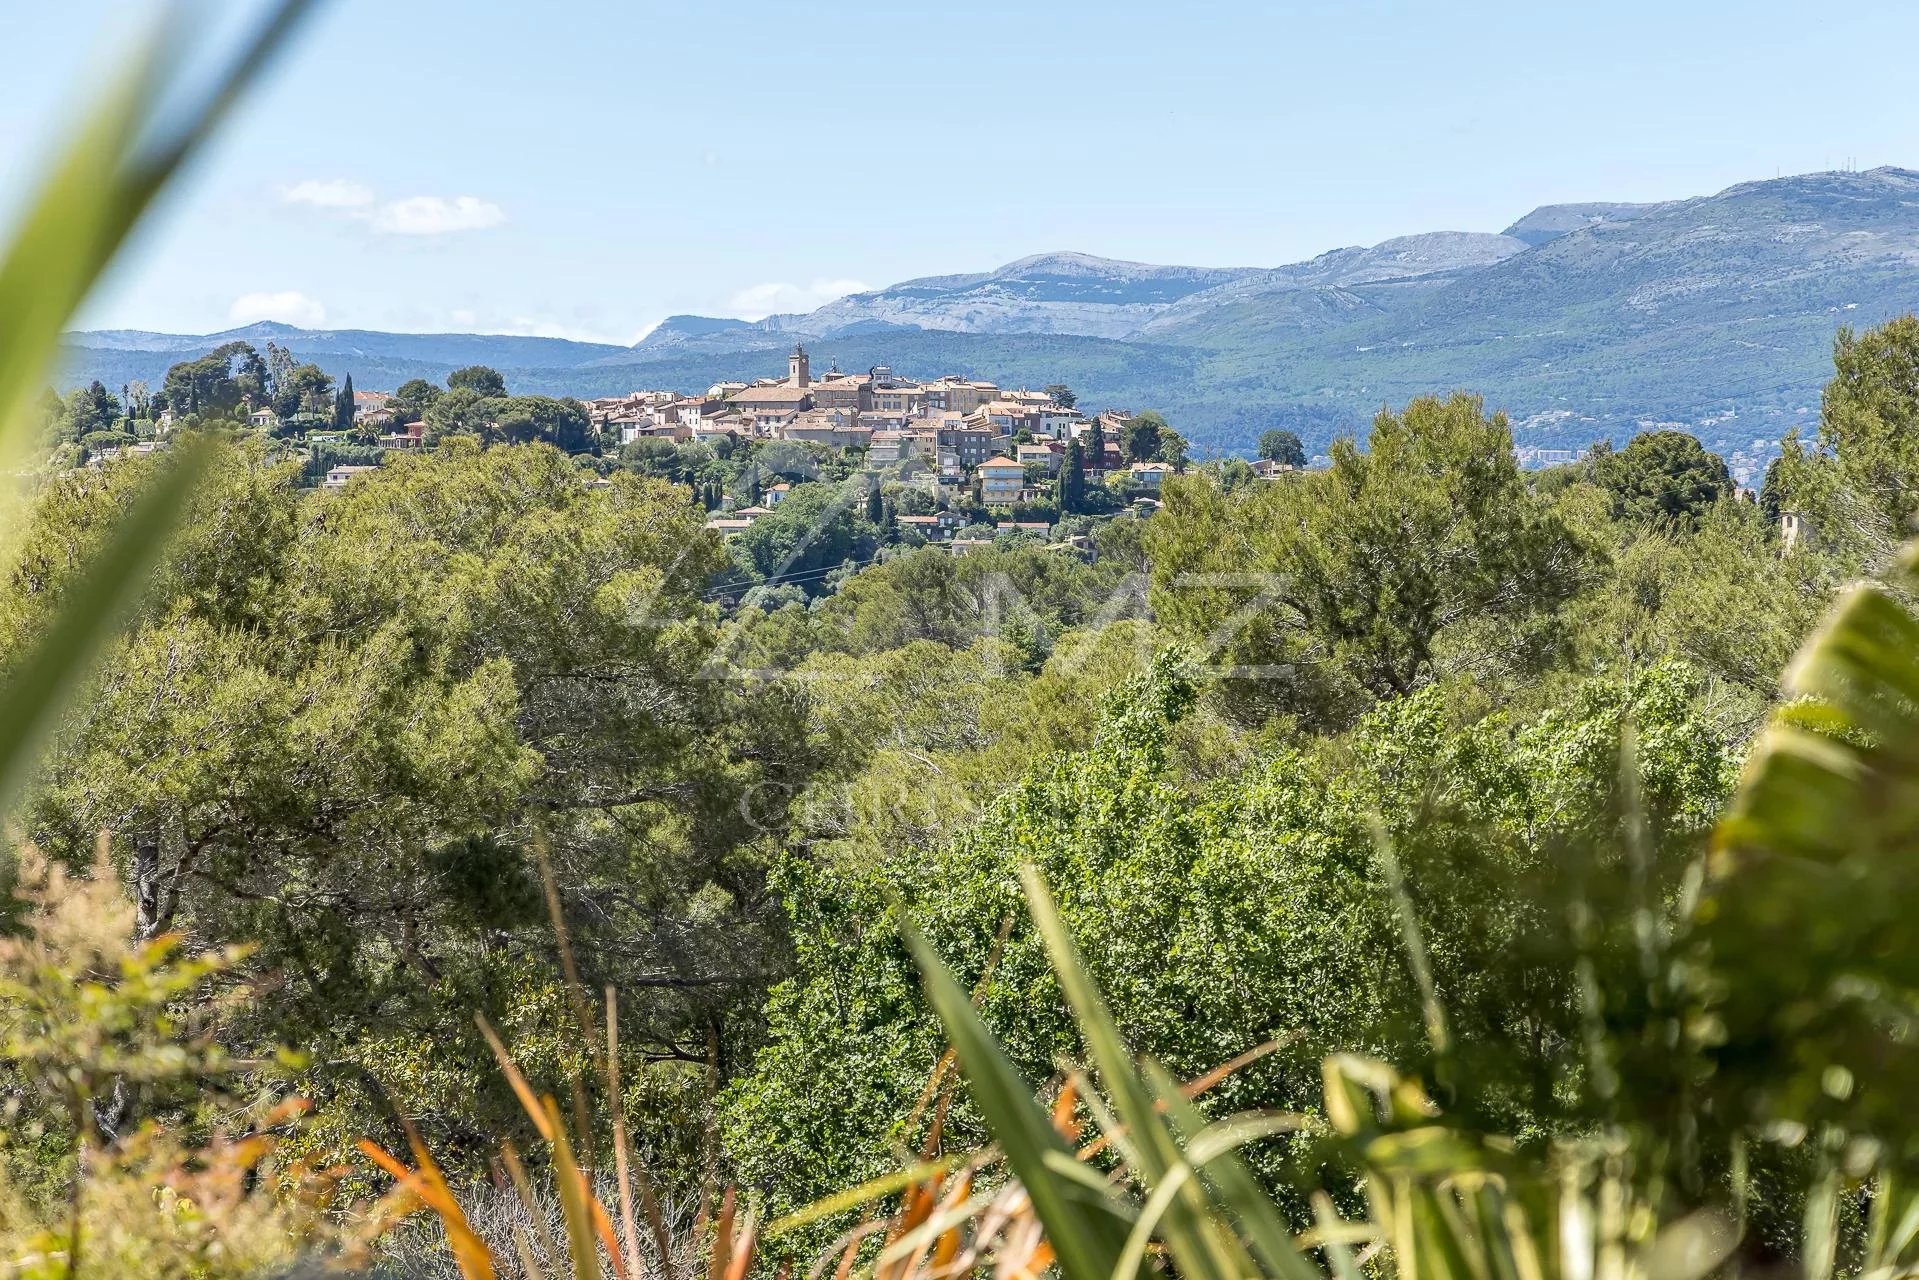 MOUGINS RESIDENTIAL AREA - VILLAGE AND HILLS VIEWS